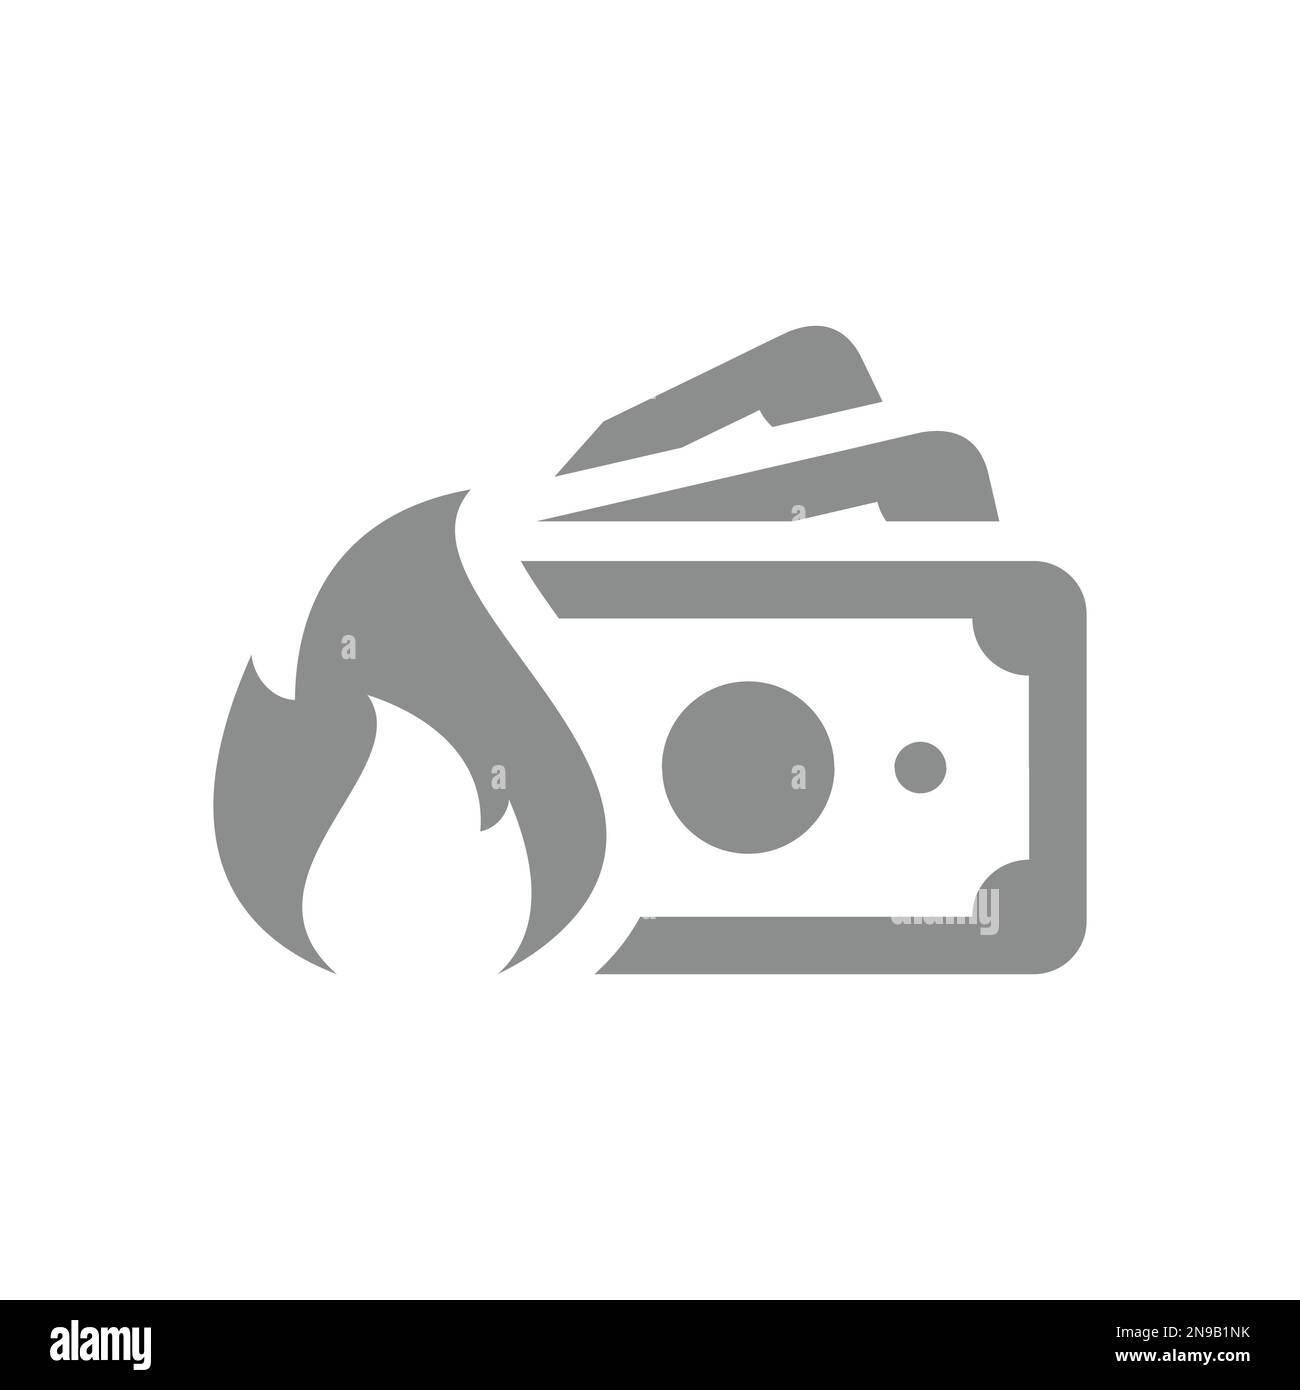 Dollar bill, banknote stack and fire or flame vector icon. Burning money, inflation symbol. Stock Vector